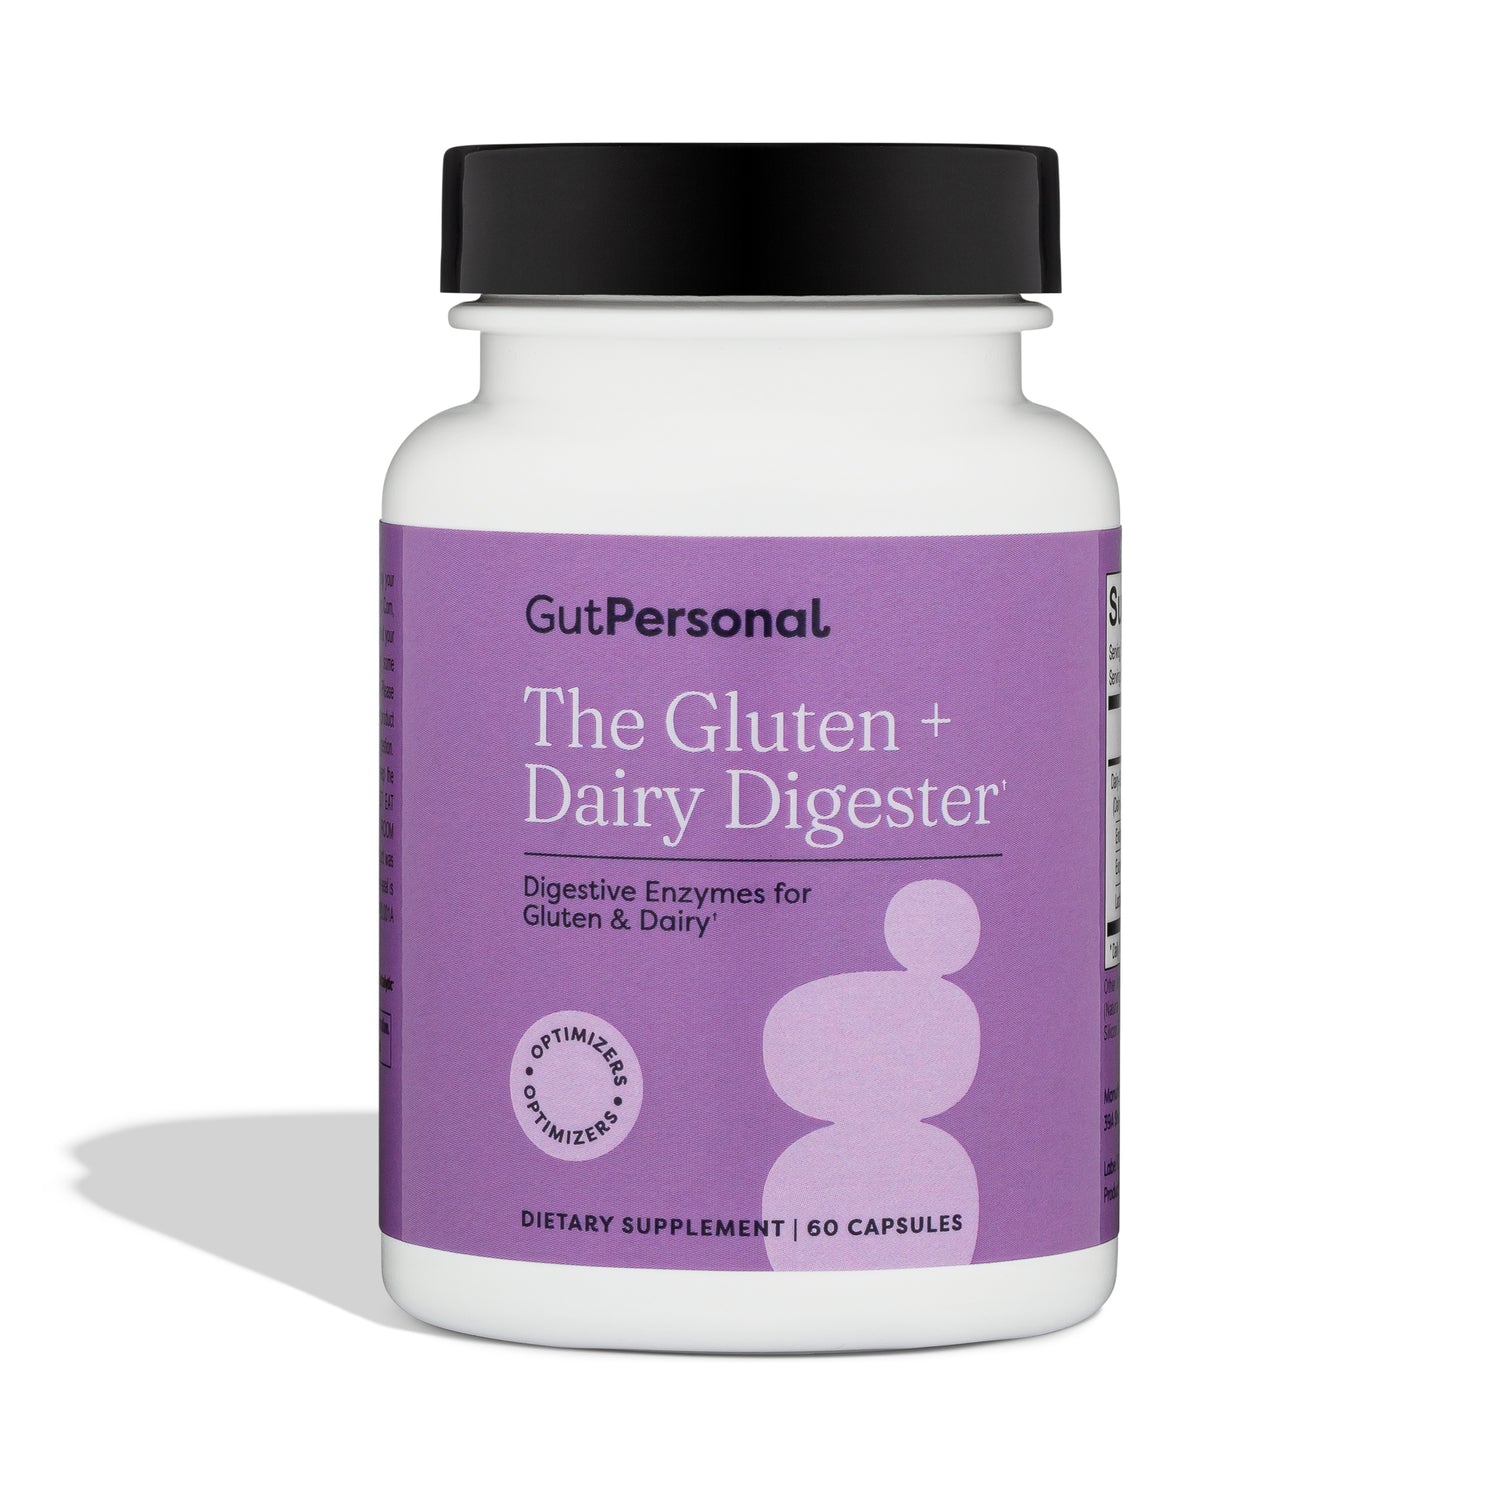 The Gluten + Dairy Digester: Digestive Enzymes for Gluten & Dairy